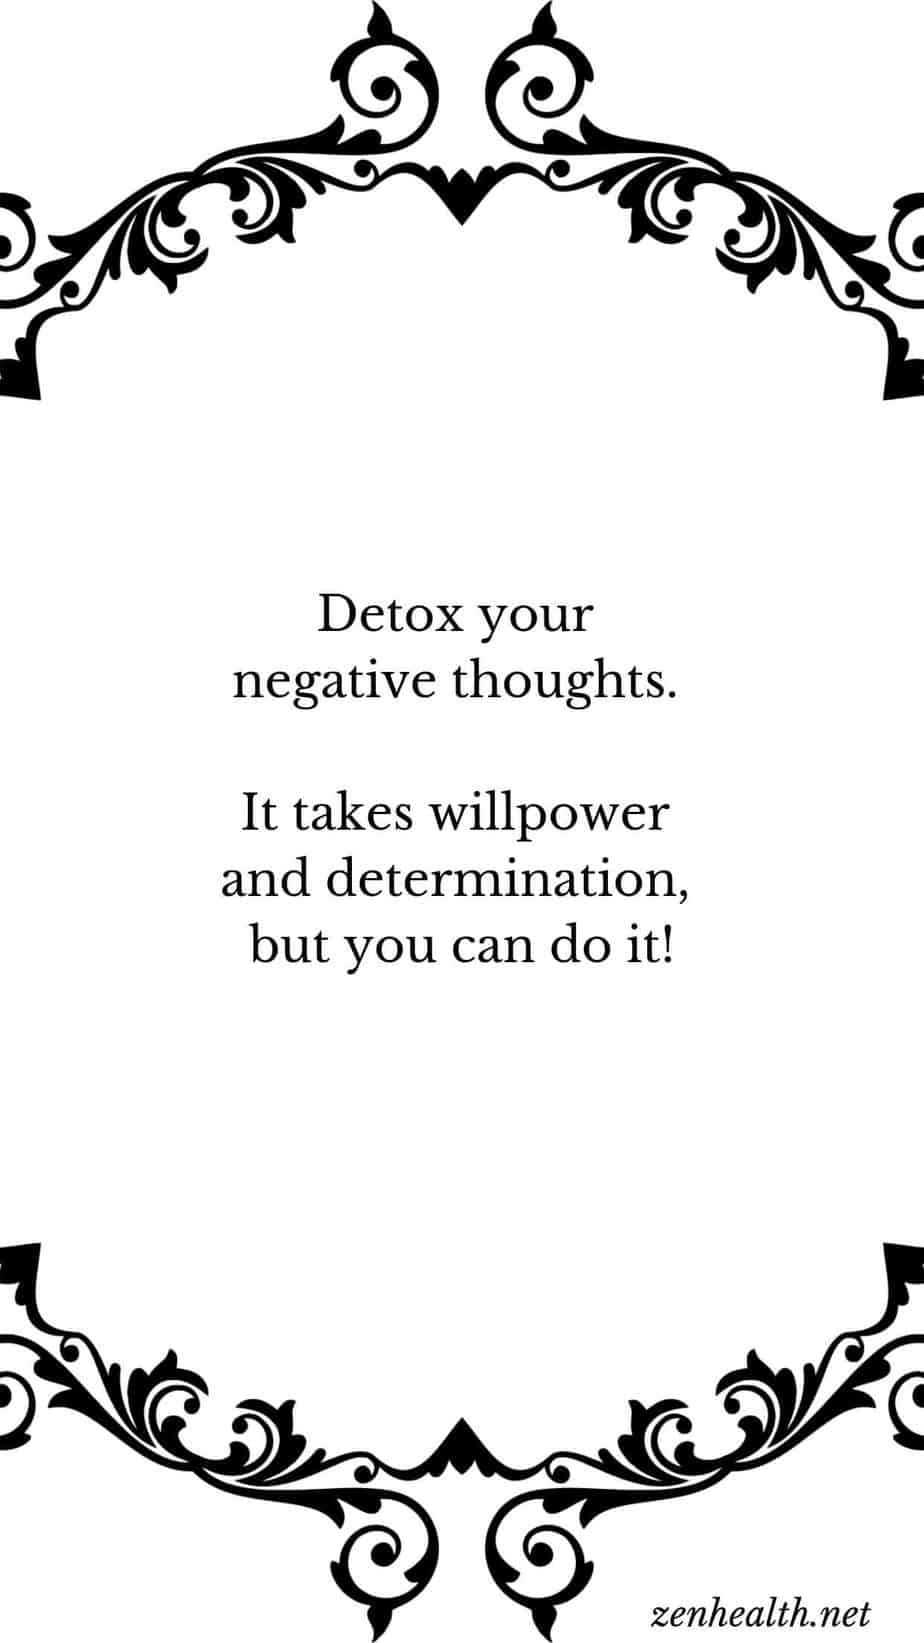 Detox your negative thoughts. It takes willpower and determination, but you can do it!